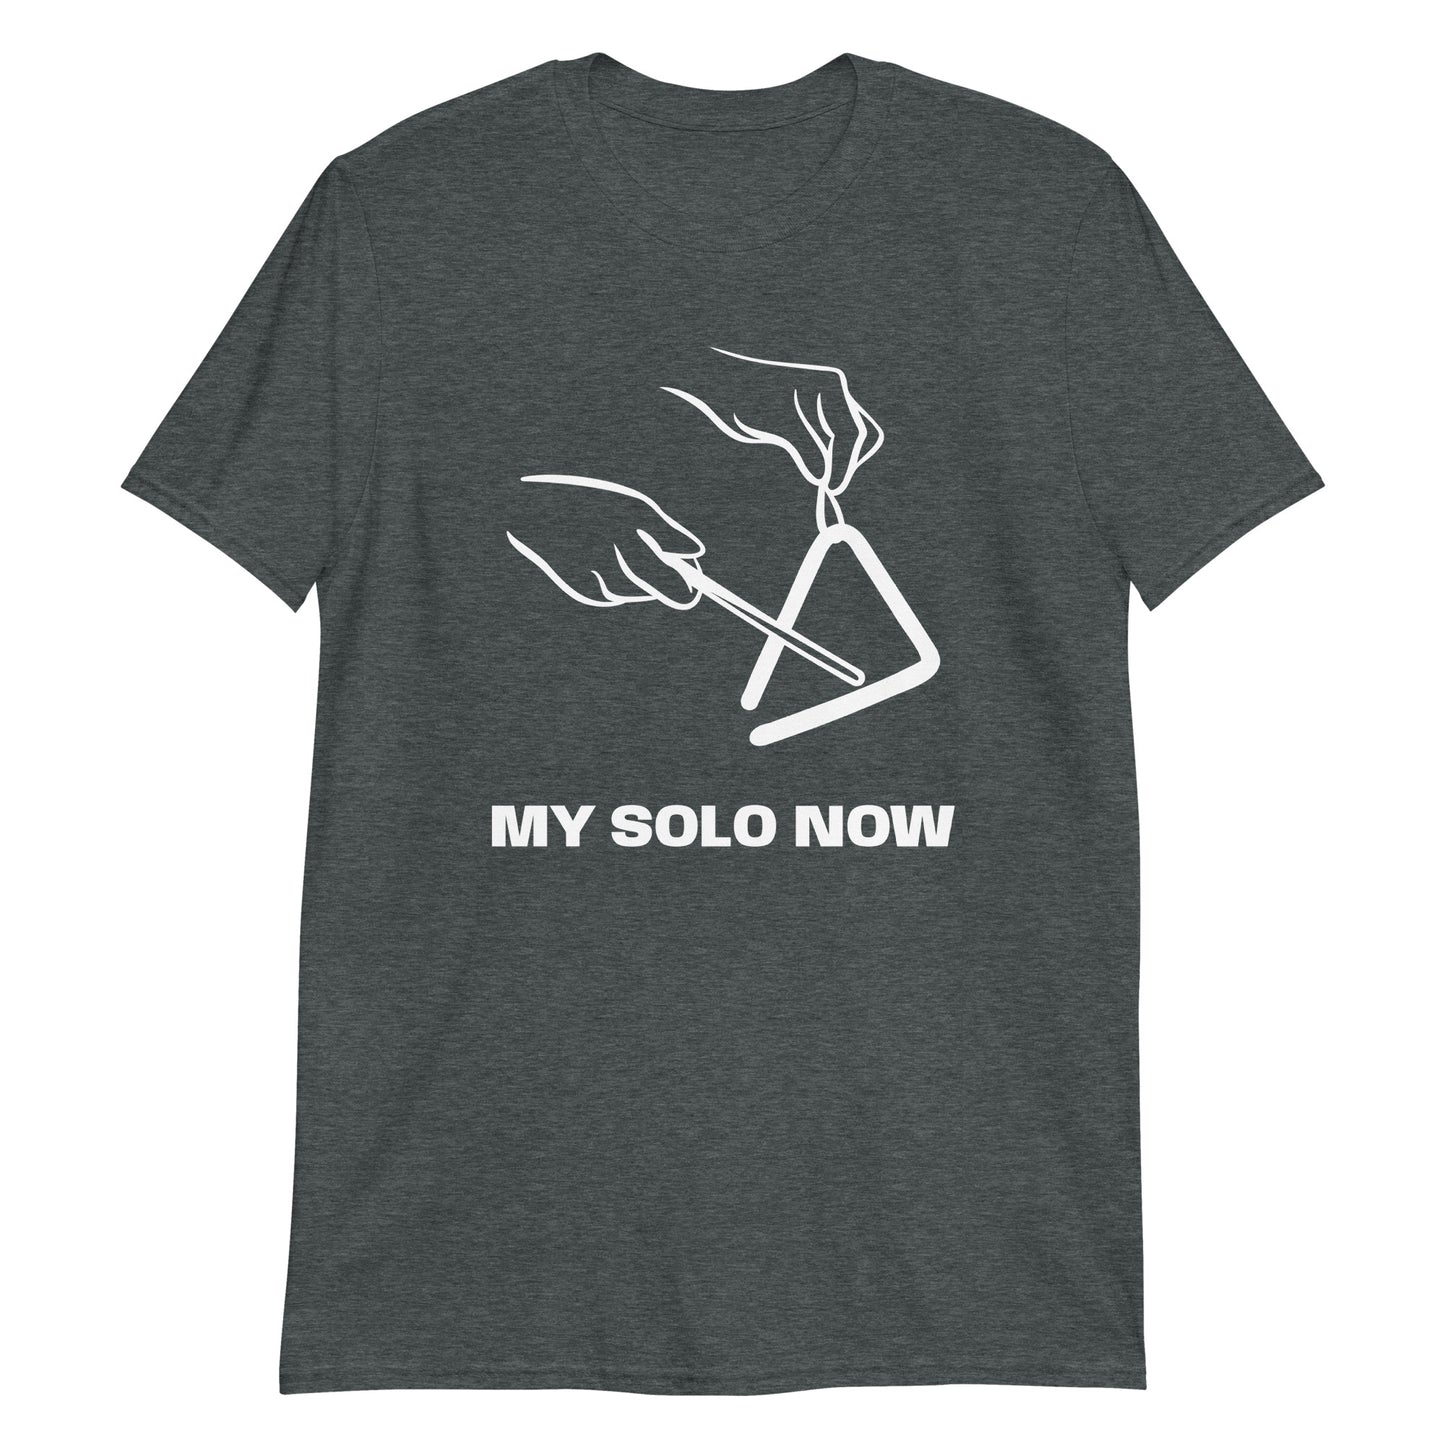 My solo now. Unisex T-Shirt